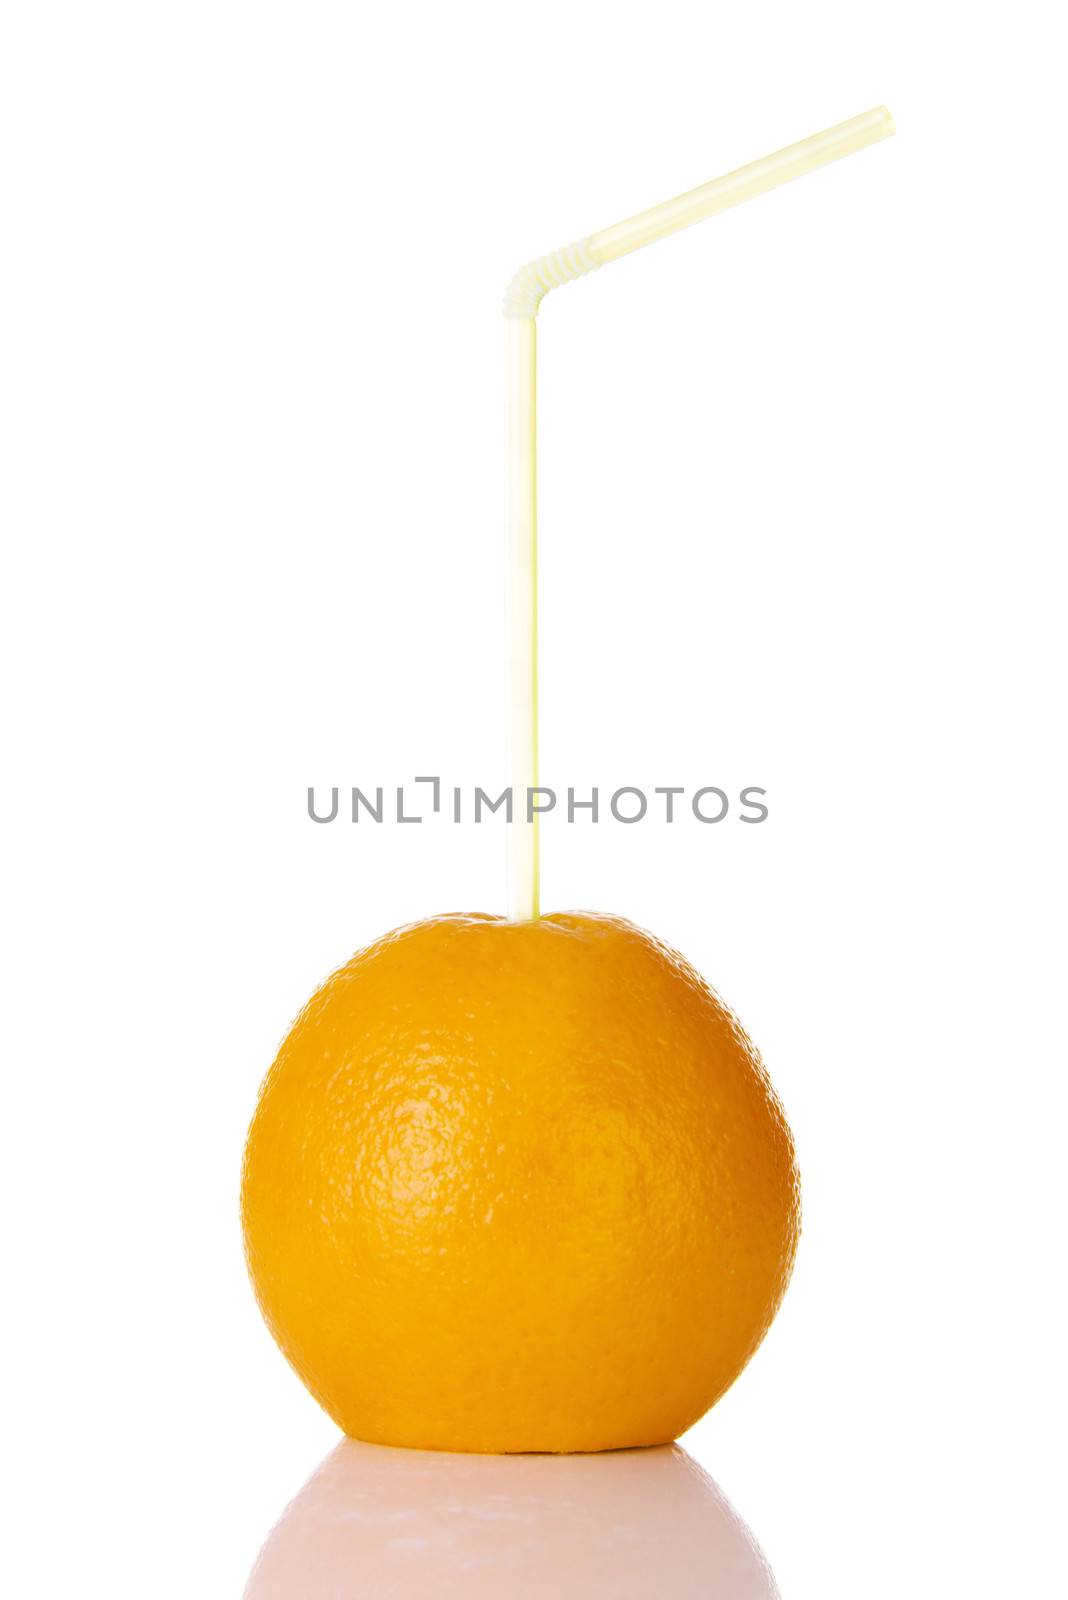 Orange fruit with straw put in it. by BDS